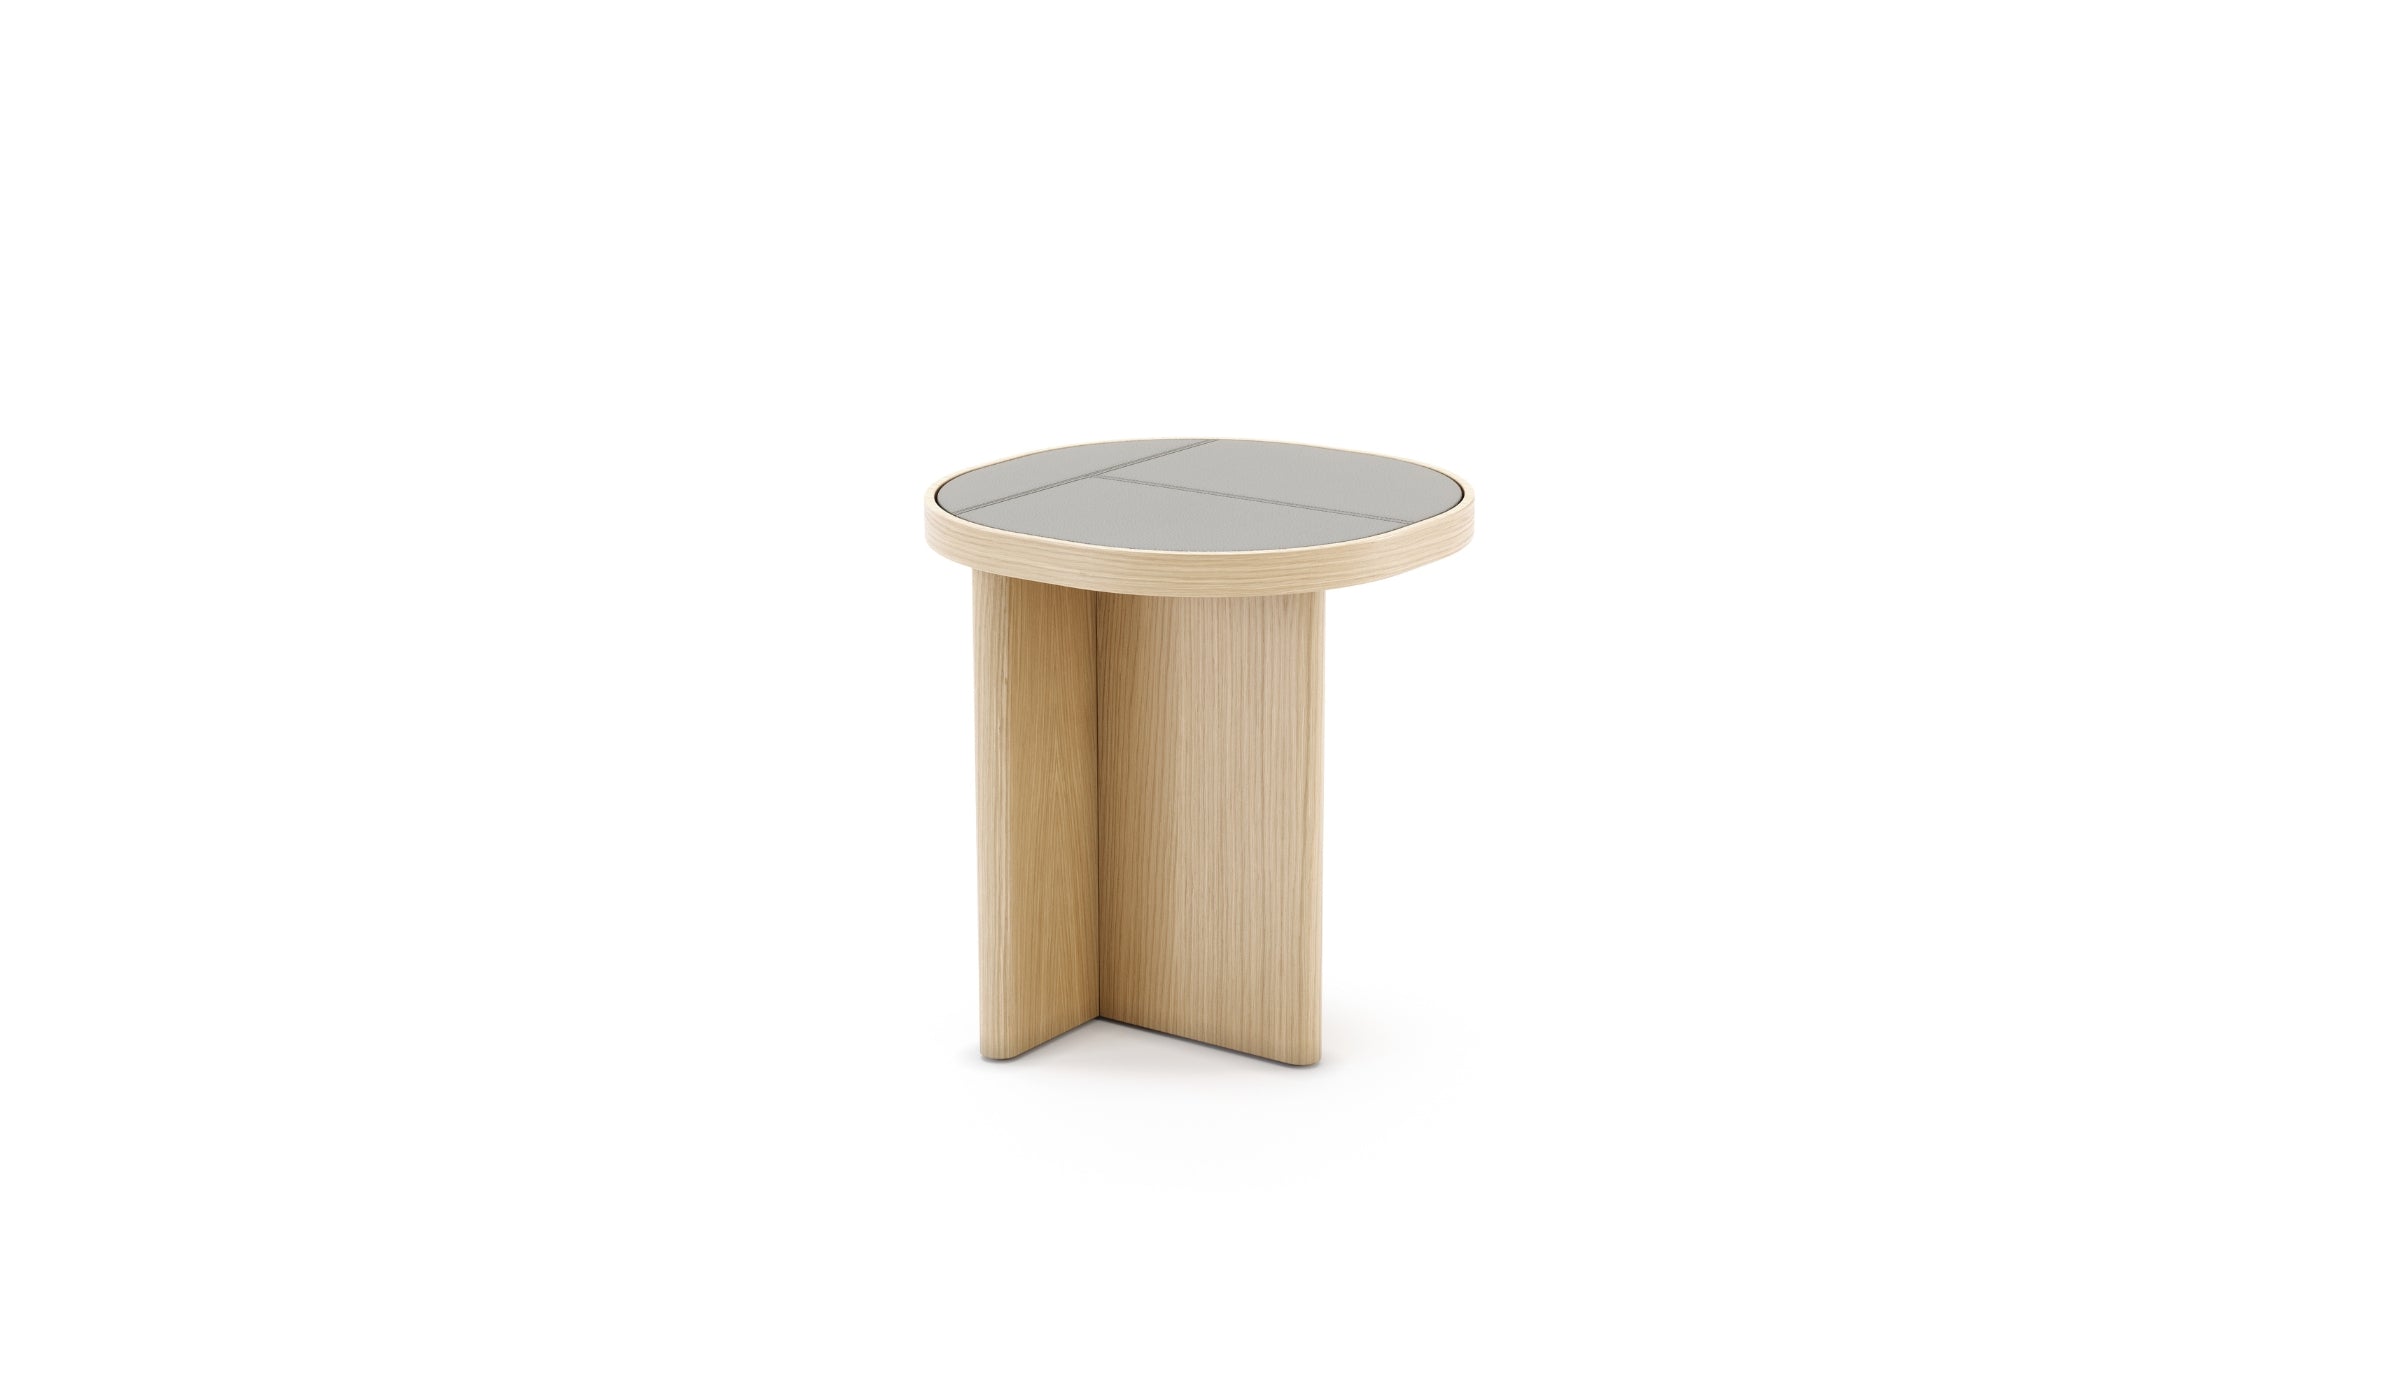 Gilbert - Table d'appoint, chêne naturel, finition cuir elephant, S